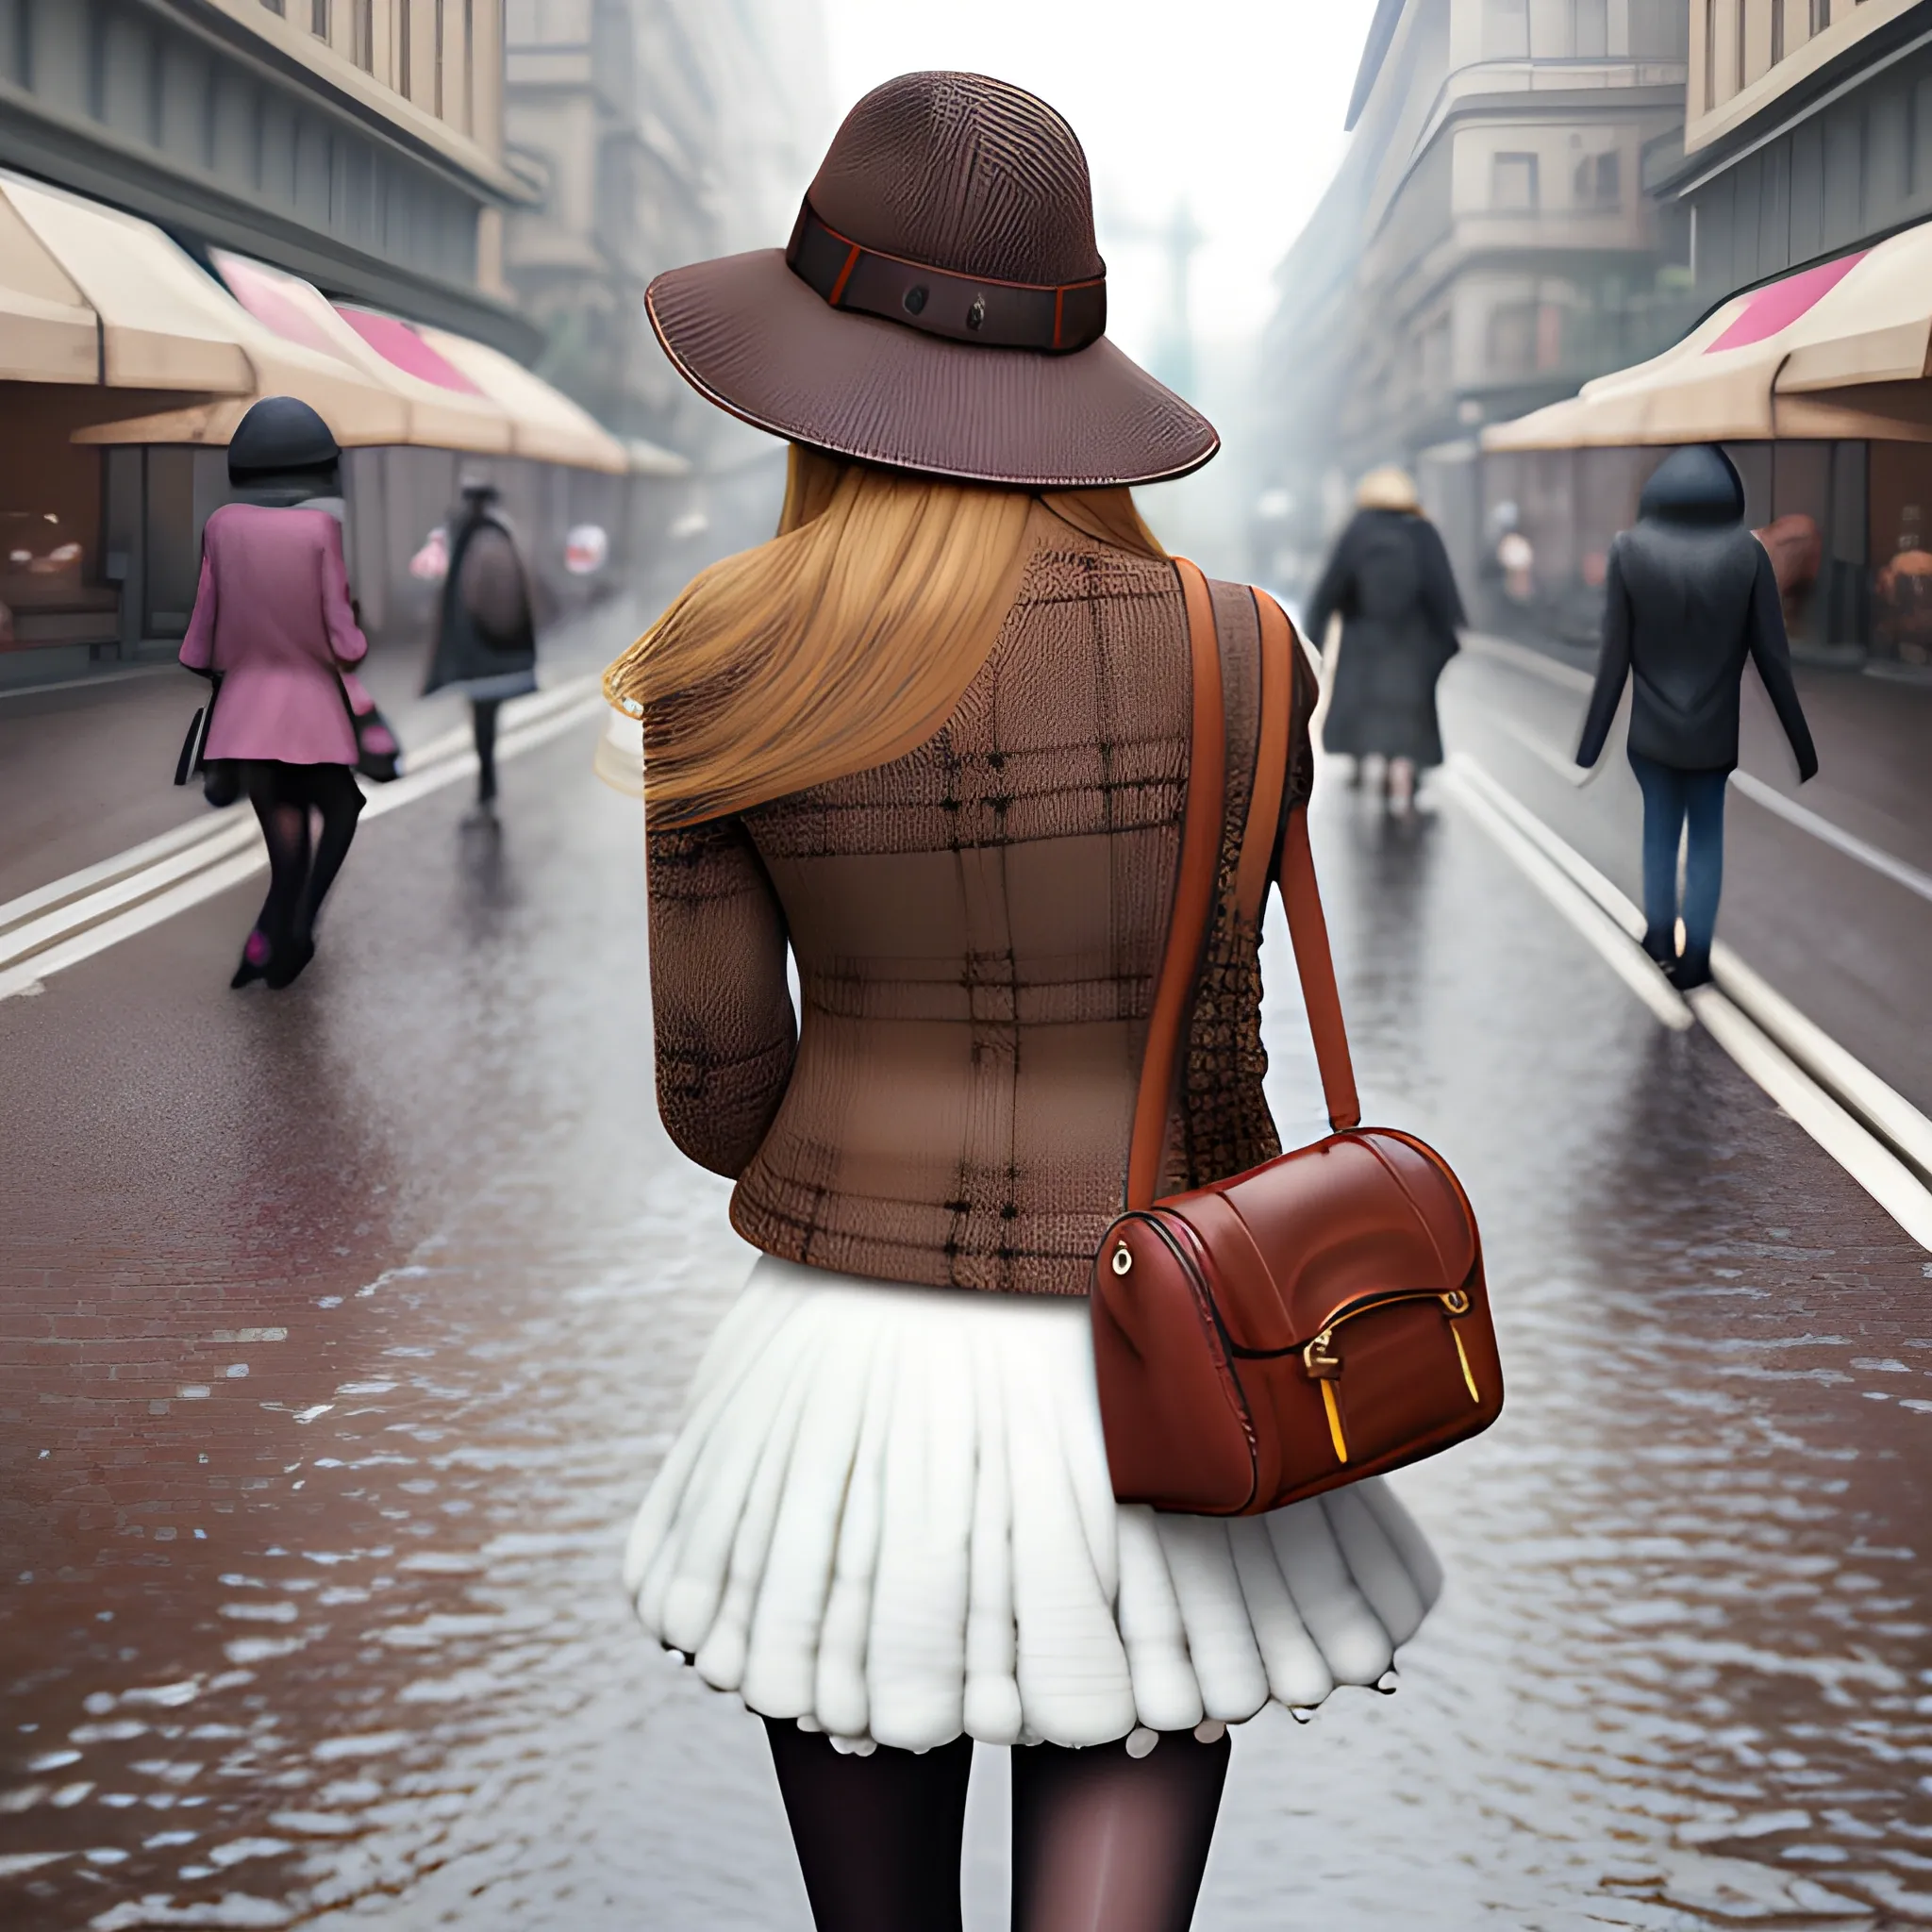 ((best quality)), ((masterpiece)), (detailed), ((woman)), dark blond hair, caucasian, top, (cotton:1.5) mini skirt, form-fitting, (short:1.2) (wollen:1.3) jacket in brown color, highly detailed clothes, checkered, high heels ankle boots, (woolen hat:1.2), pantyhose, (shoulder bag:1.2), from behind, walking on the street, rain, masterpiece, contrasting soft skin, (lighting:1.2)